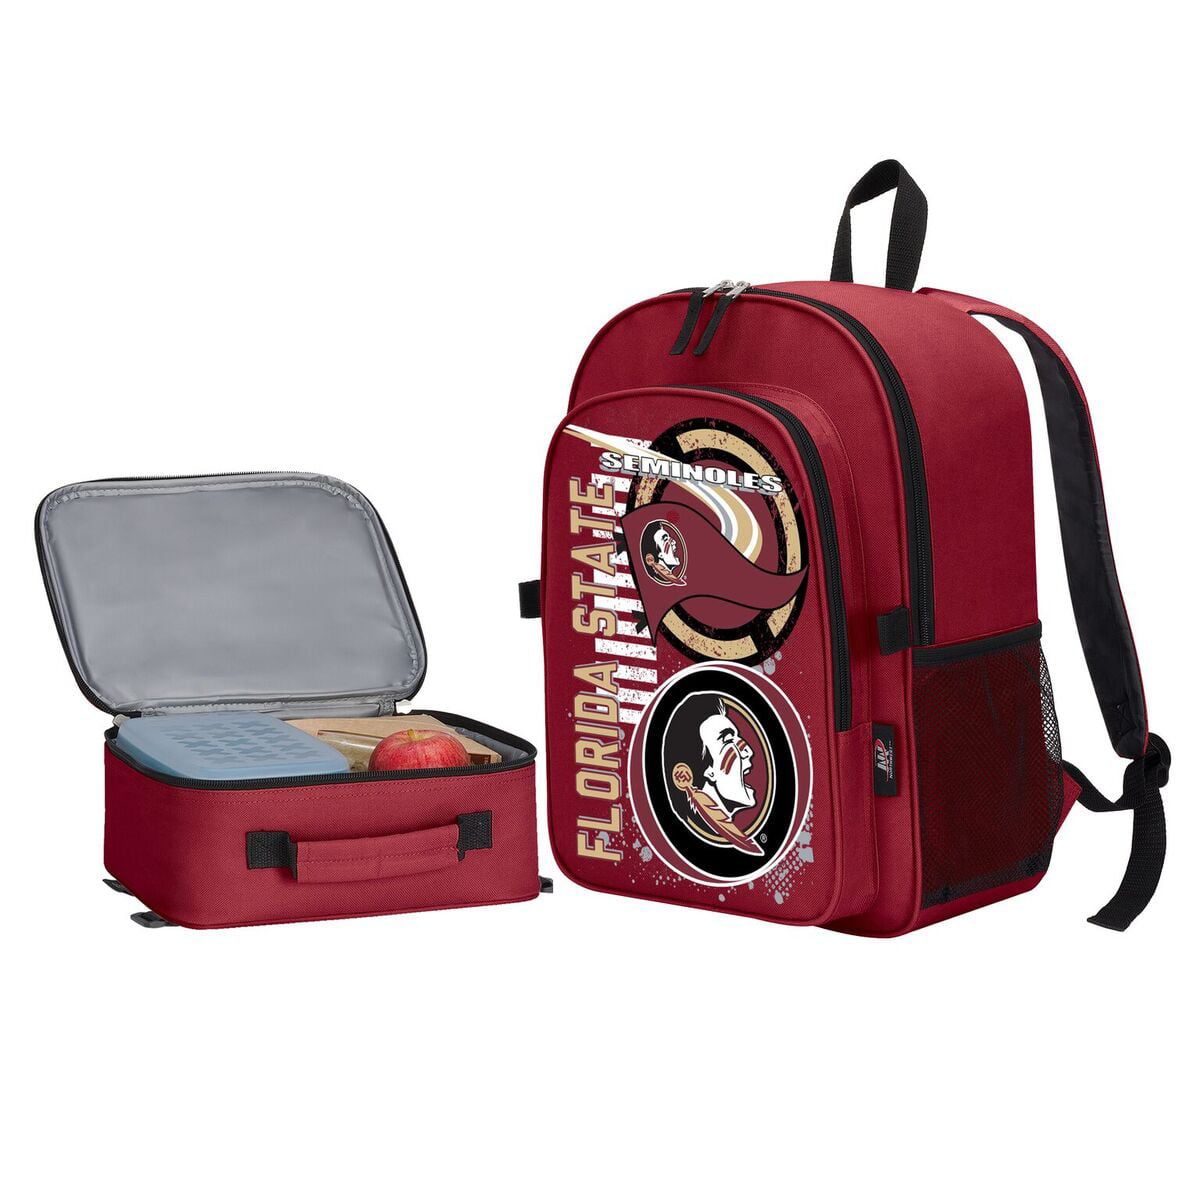 Multi Color 10.5 x 8.5 x 4 Officially Licensed NCAA Sacked Lunch Cooler Bag 